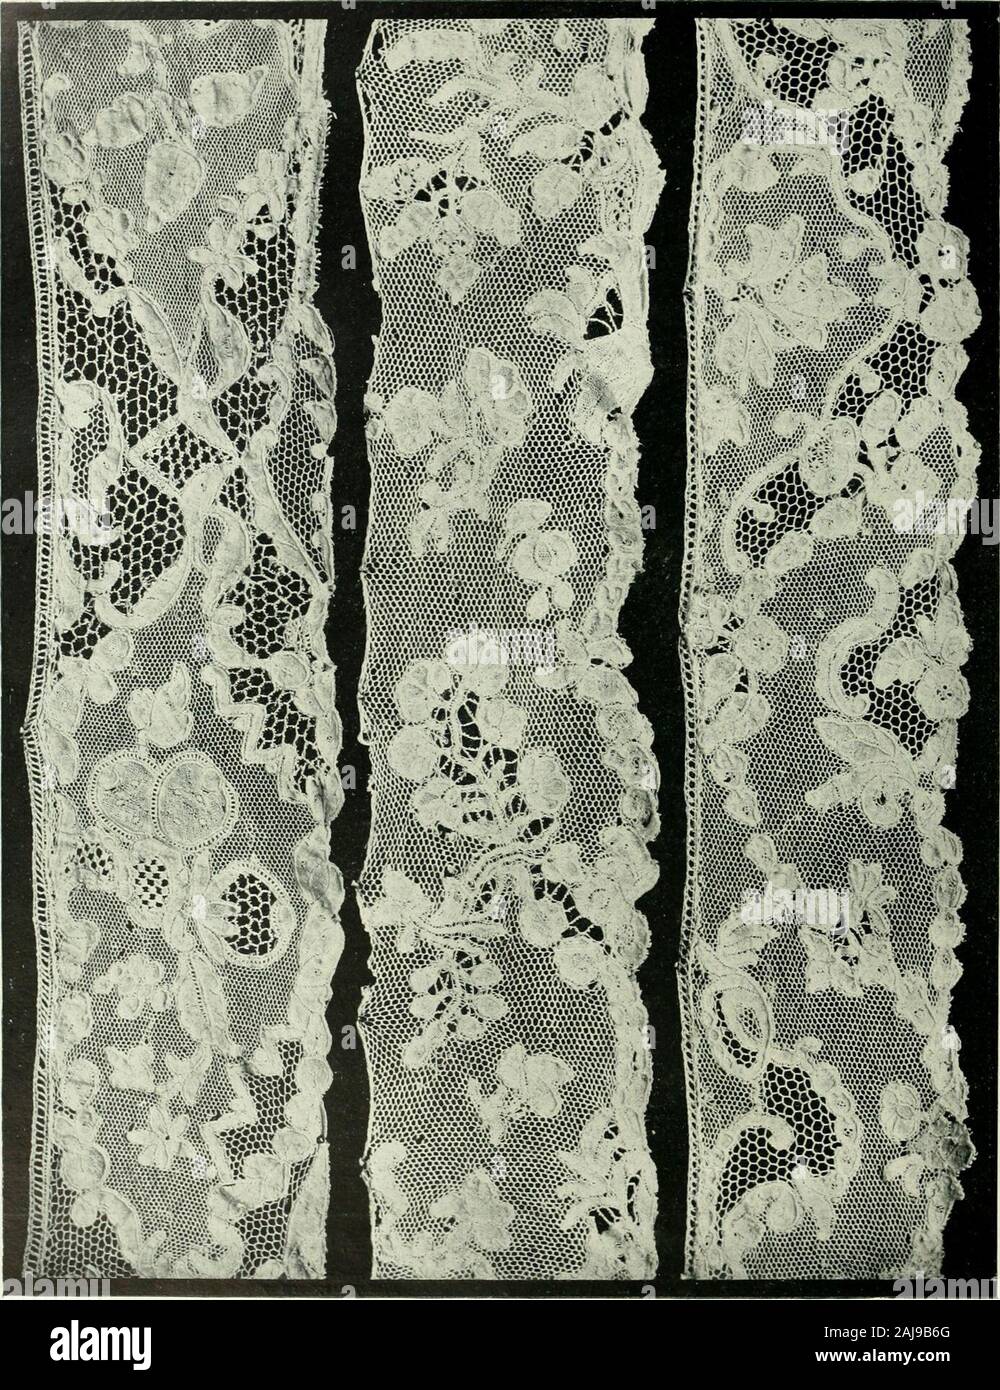 Seven centuries of lace . Plate CIII. FOUR SPECIMENS OF BOBHINMADE LACE,  CALLED BINCHE LACE Thi- same threads are used for the whole width of the  lace. Together 6 ft. 6 in.